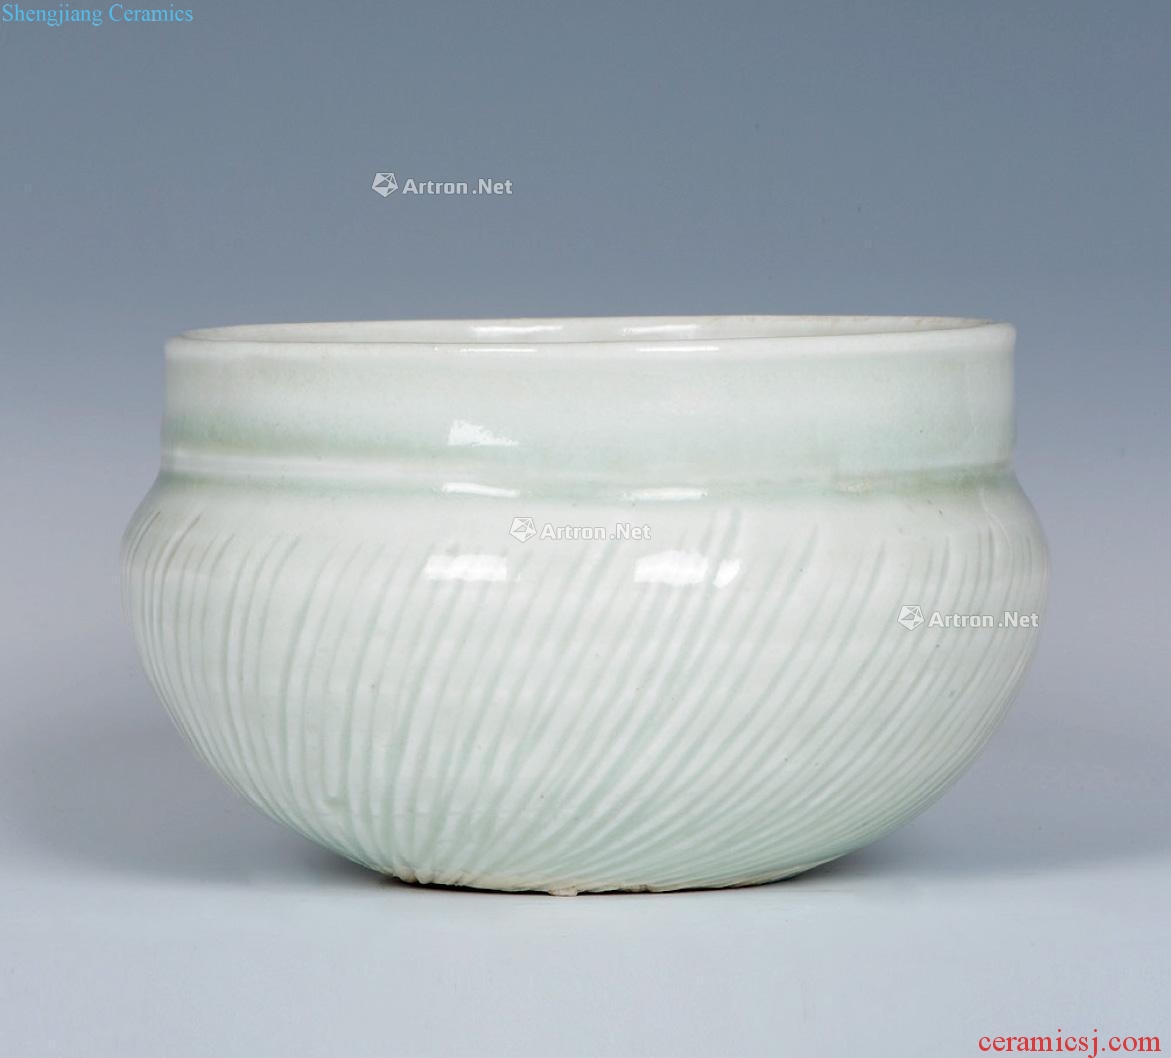 Northern song dynasty blue willow bowls